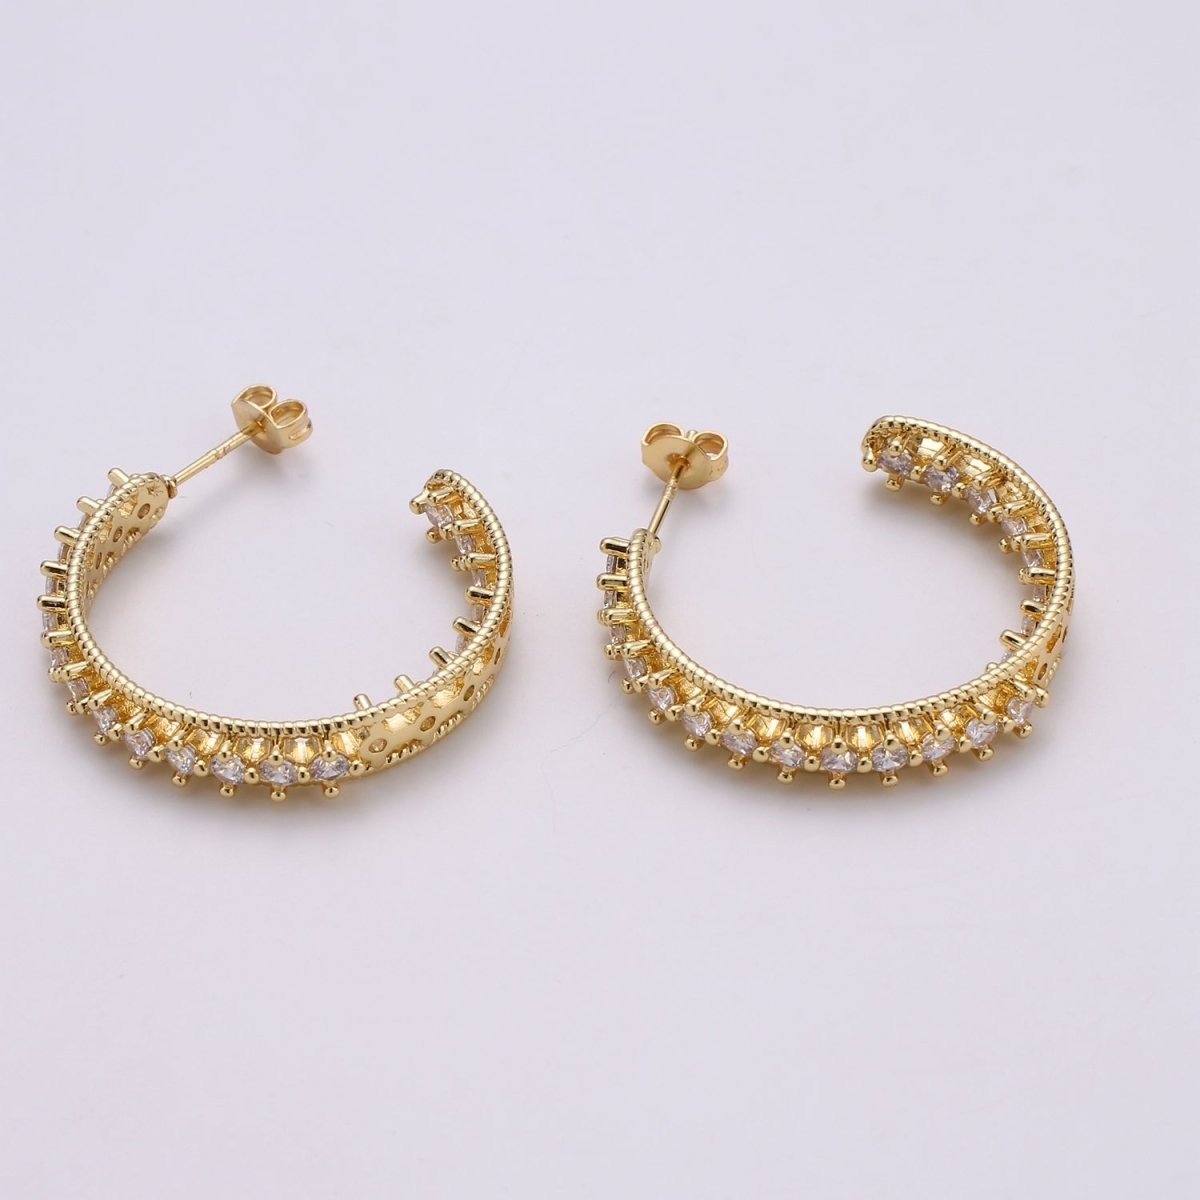 1 Pair Classic Design 24K Gold Stud Earring, CZ Pave Gold Earring for DIY Earring Craft Supply Jewelry Making, EARR-1398 Q-420 - DLUXCA